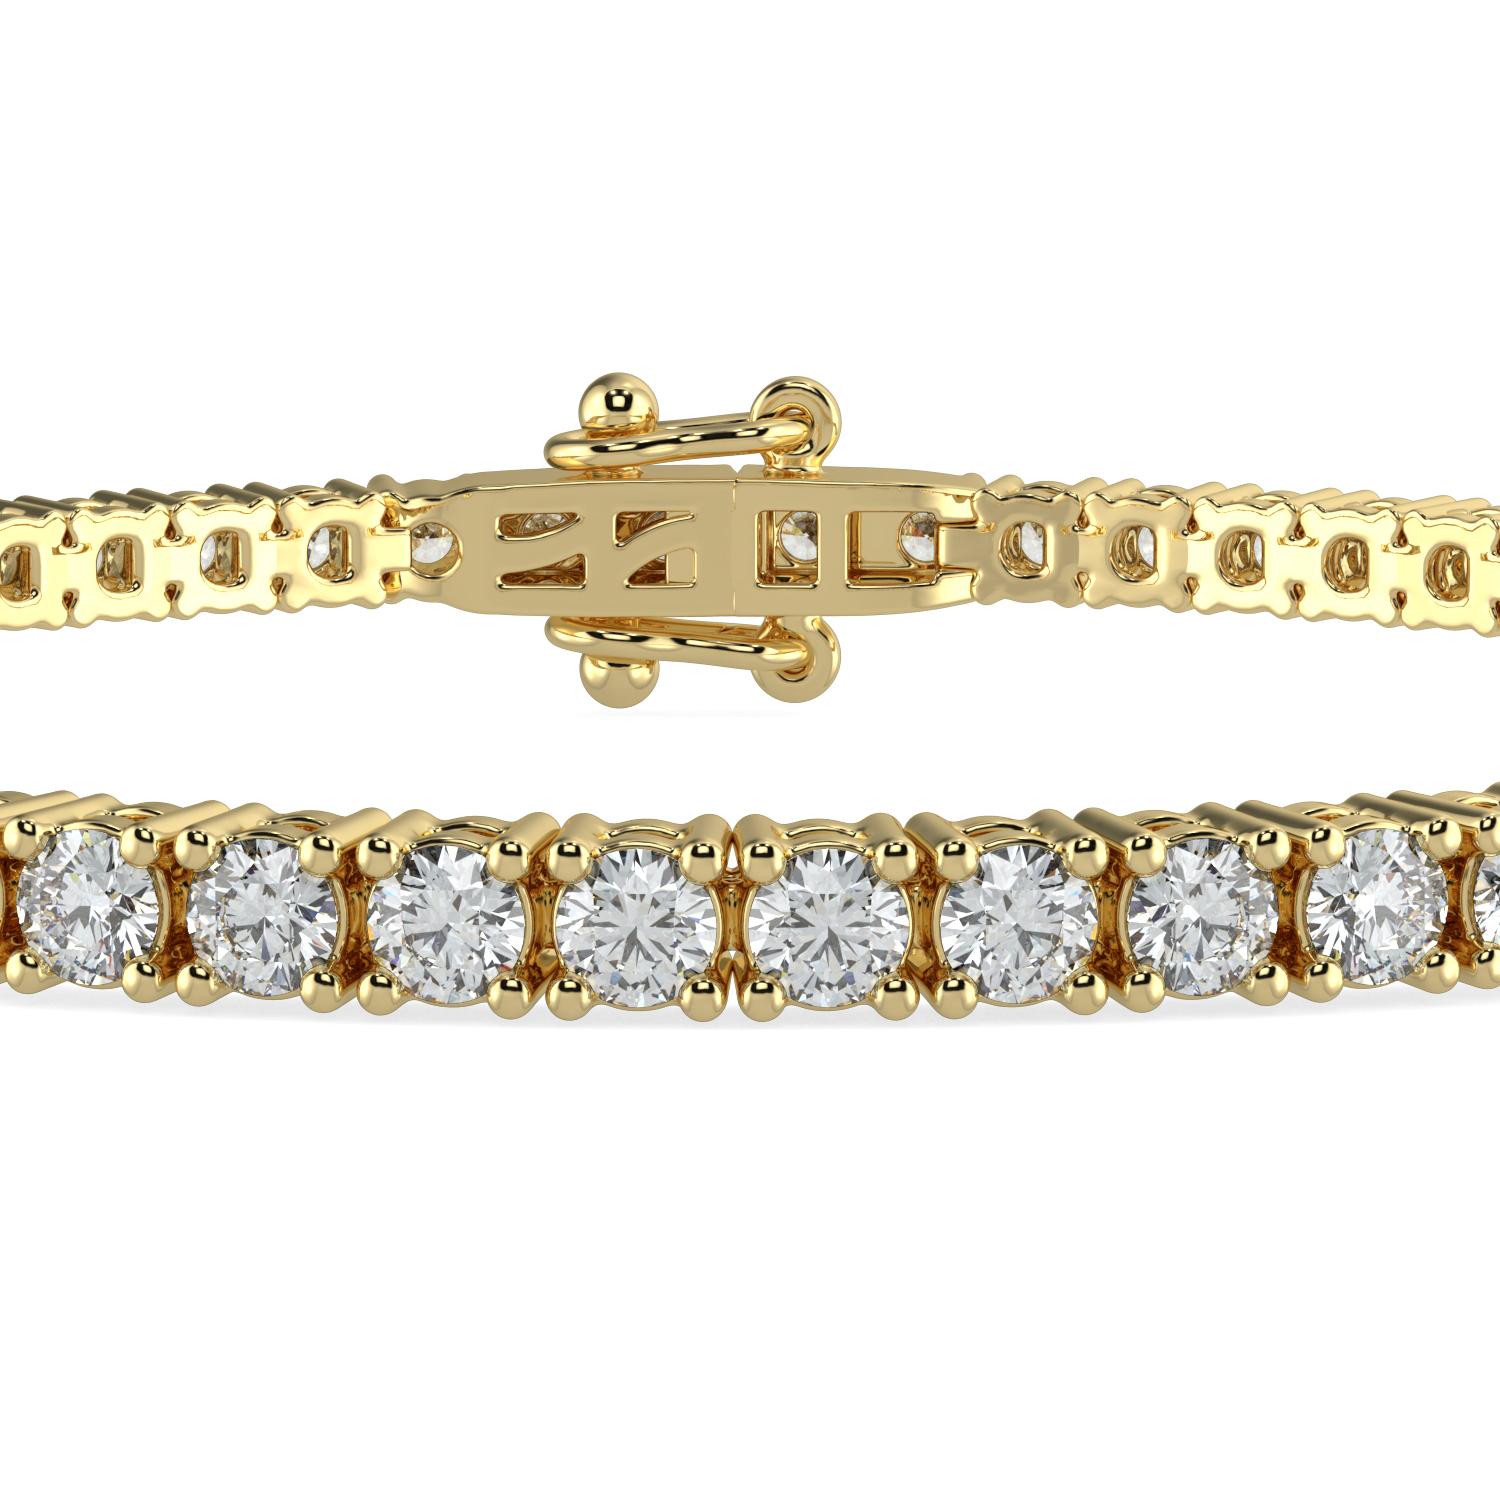 15.00 Carat Round Cut GH-I1 Natural Diamond Classic Tennis Bracelet 4 Prong 14K Yellow Gold for Women

Specification
Brand: AAMIAA
Length: 7 Inches 
Color: GH
Carat Weight:15.00CTW
Clarity: I1

LUXURIOUS AND LASTING- Our bracelets are a luxurious